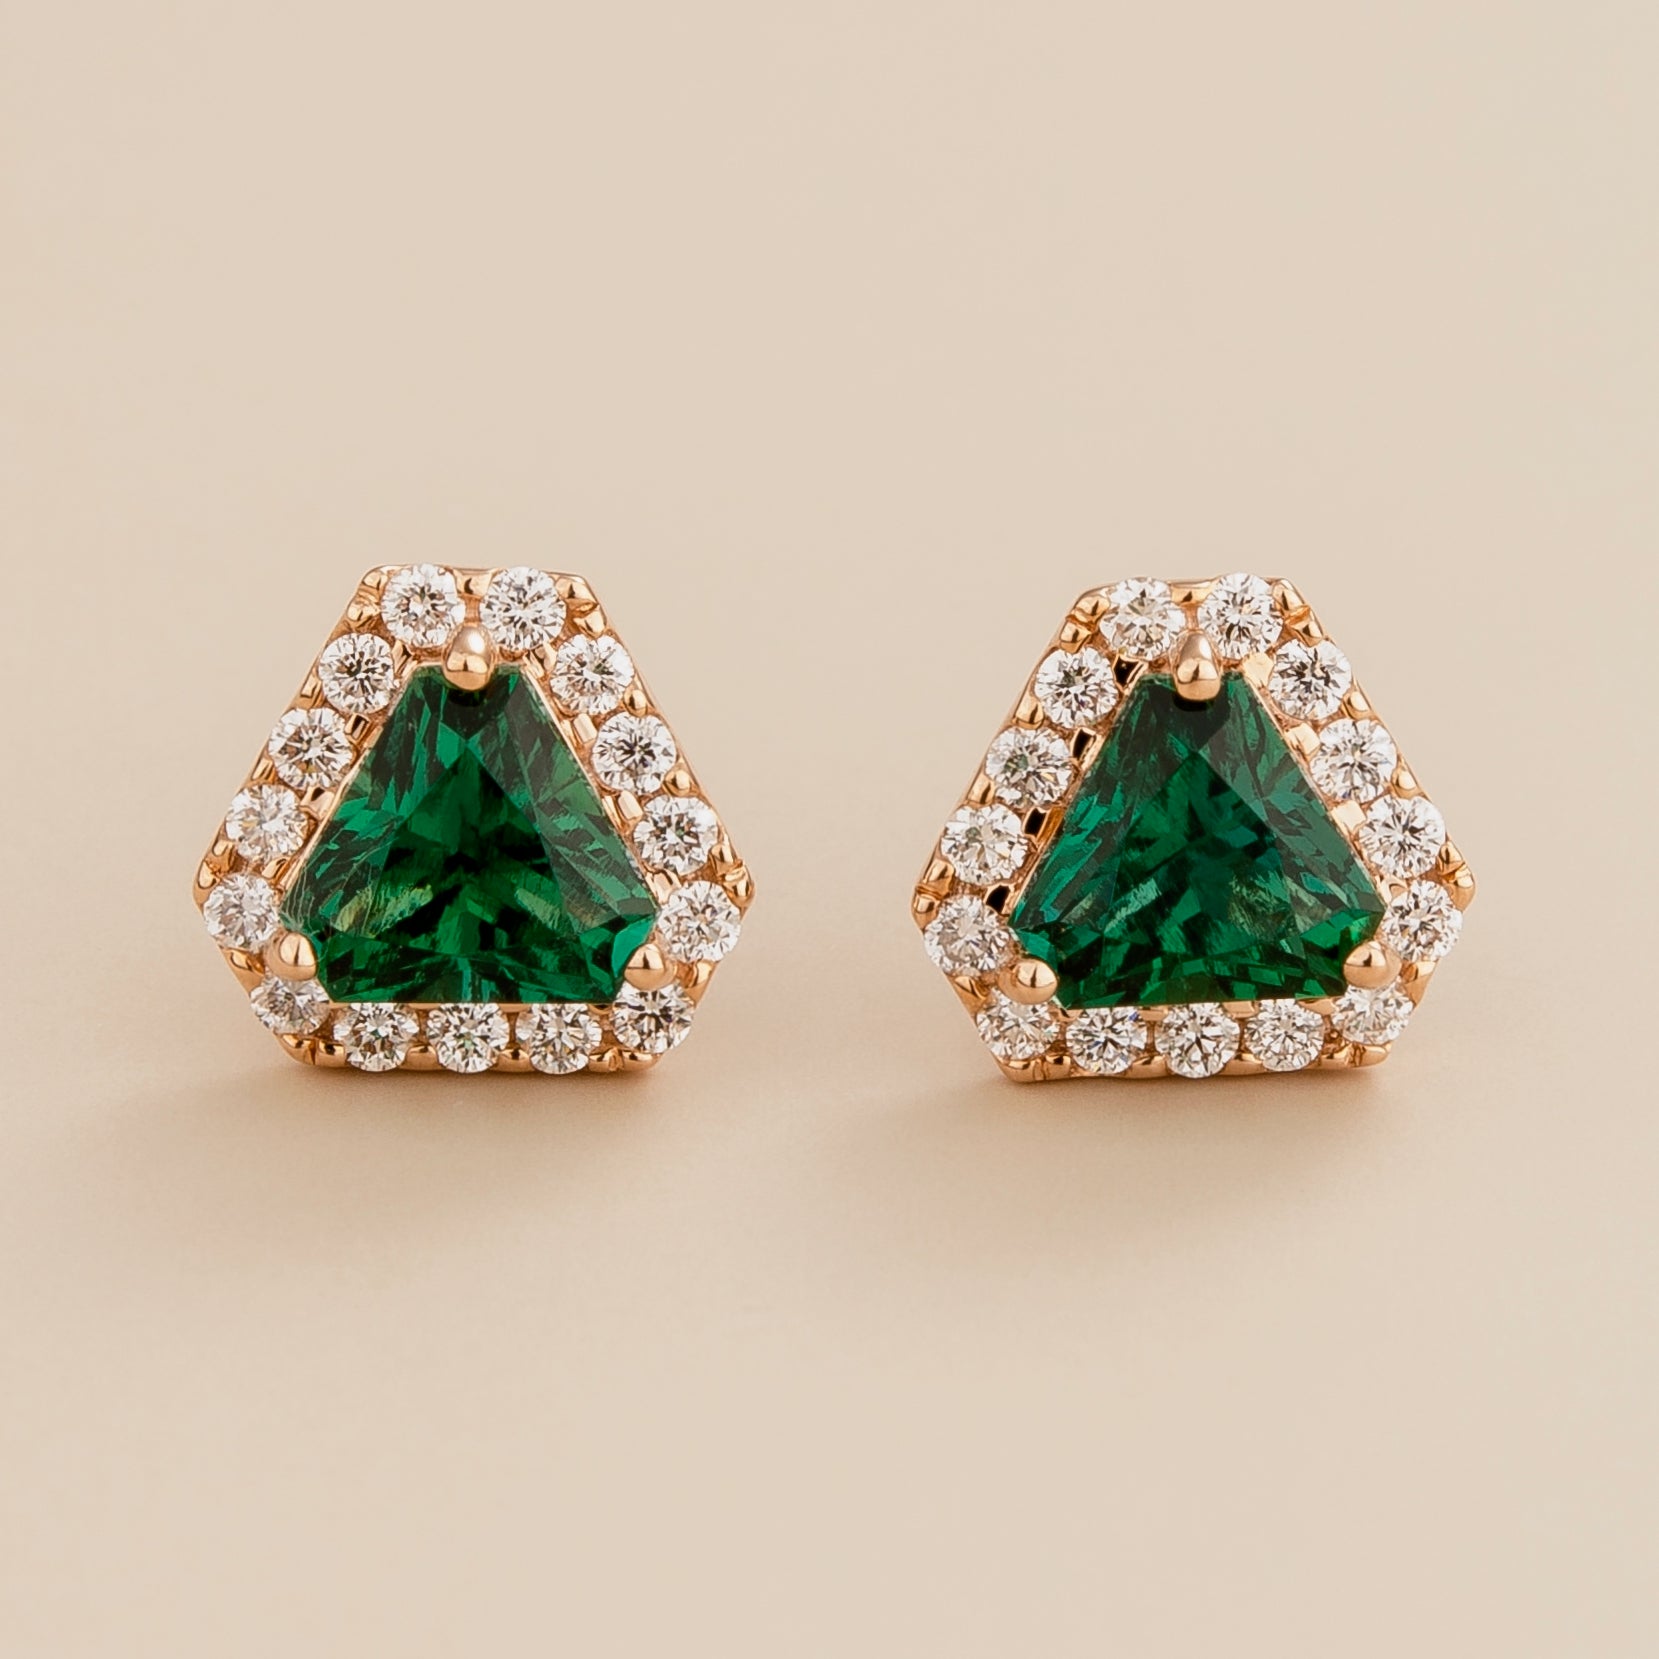 Diana earrings in 18 kt pink gold vermeil set with lab grown diamond and triangle emerald gem stone